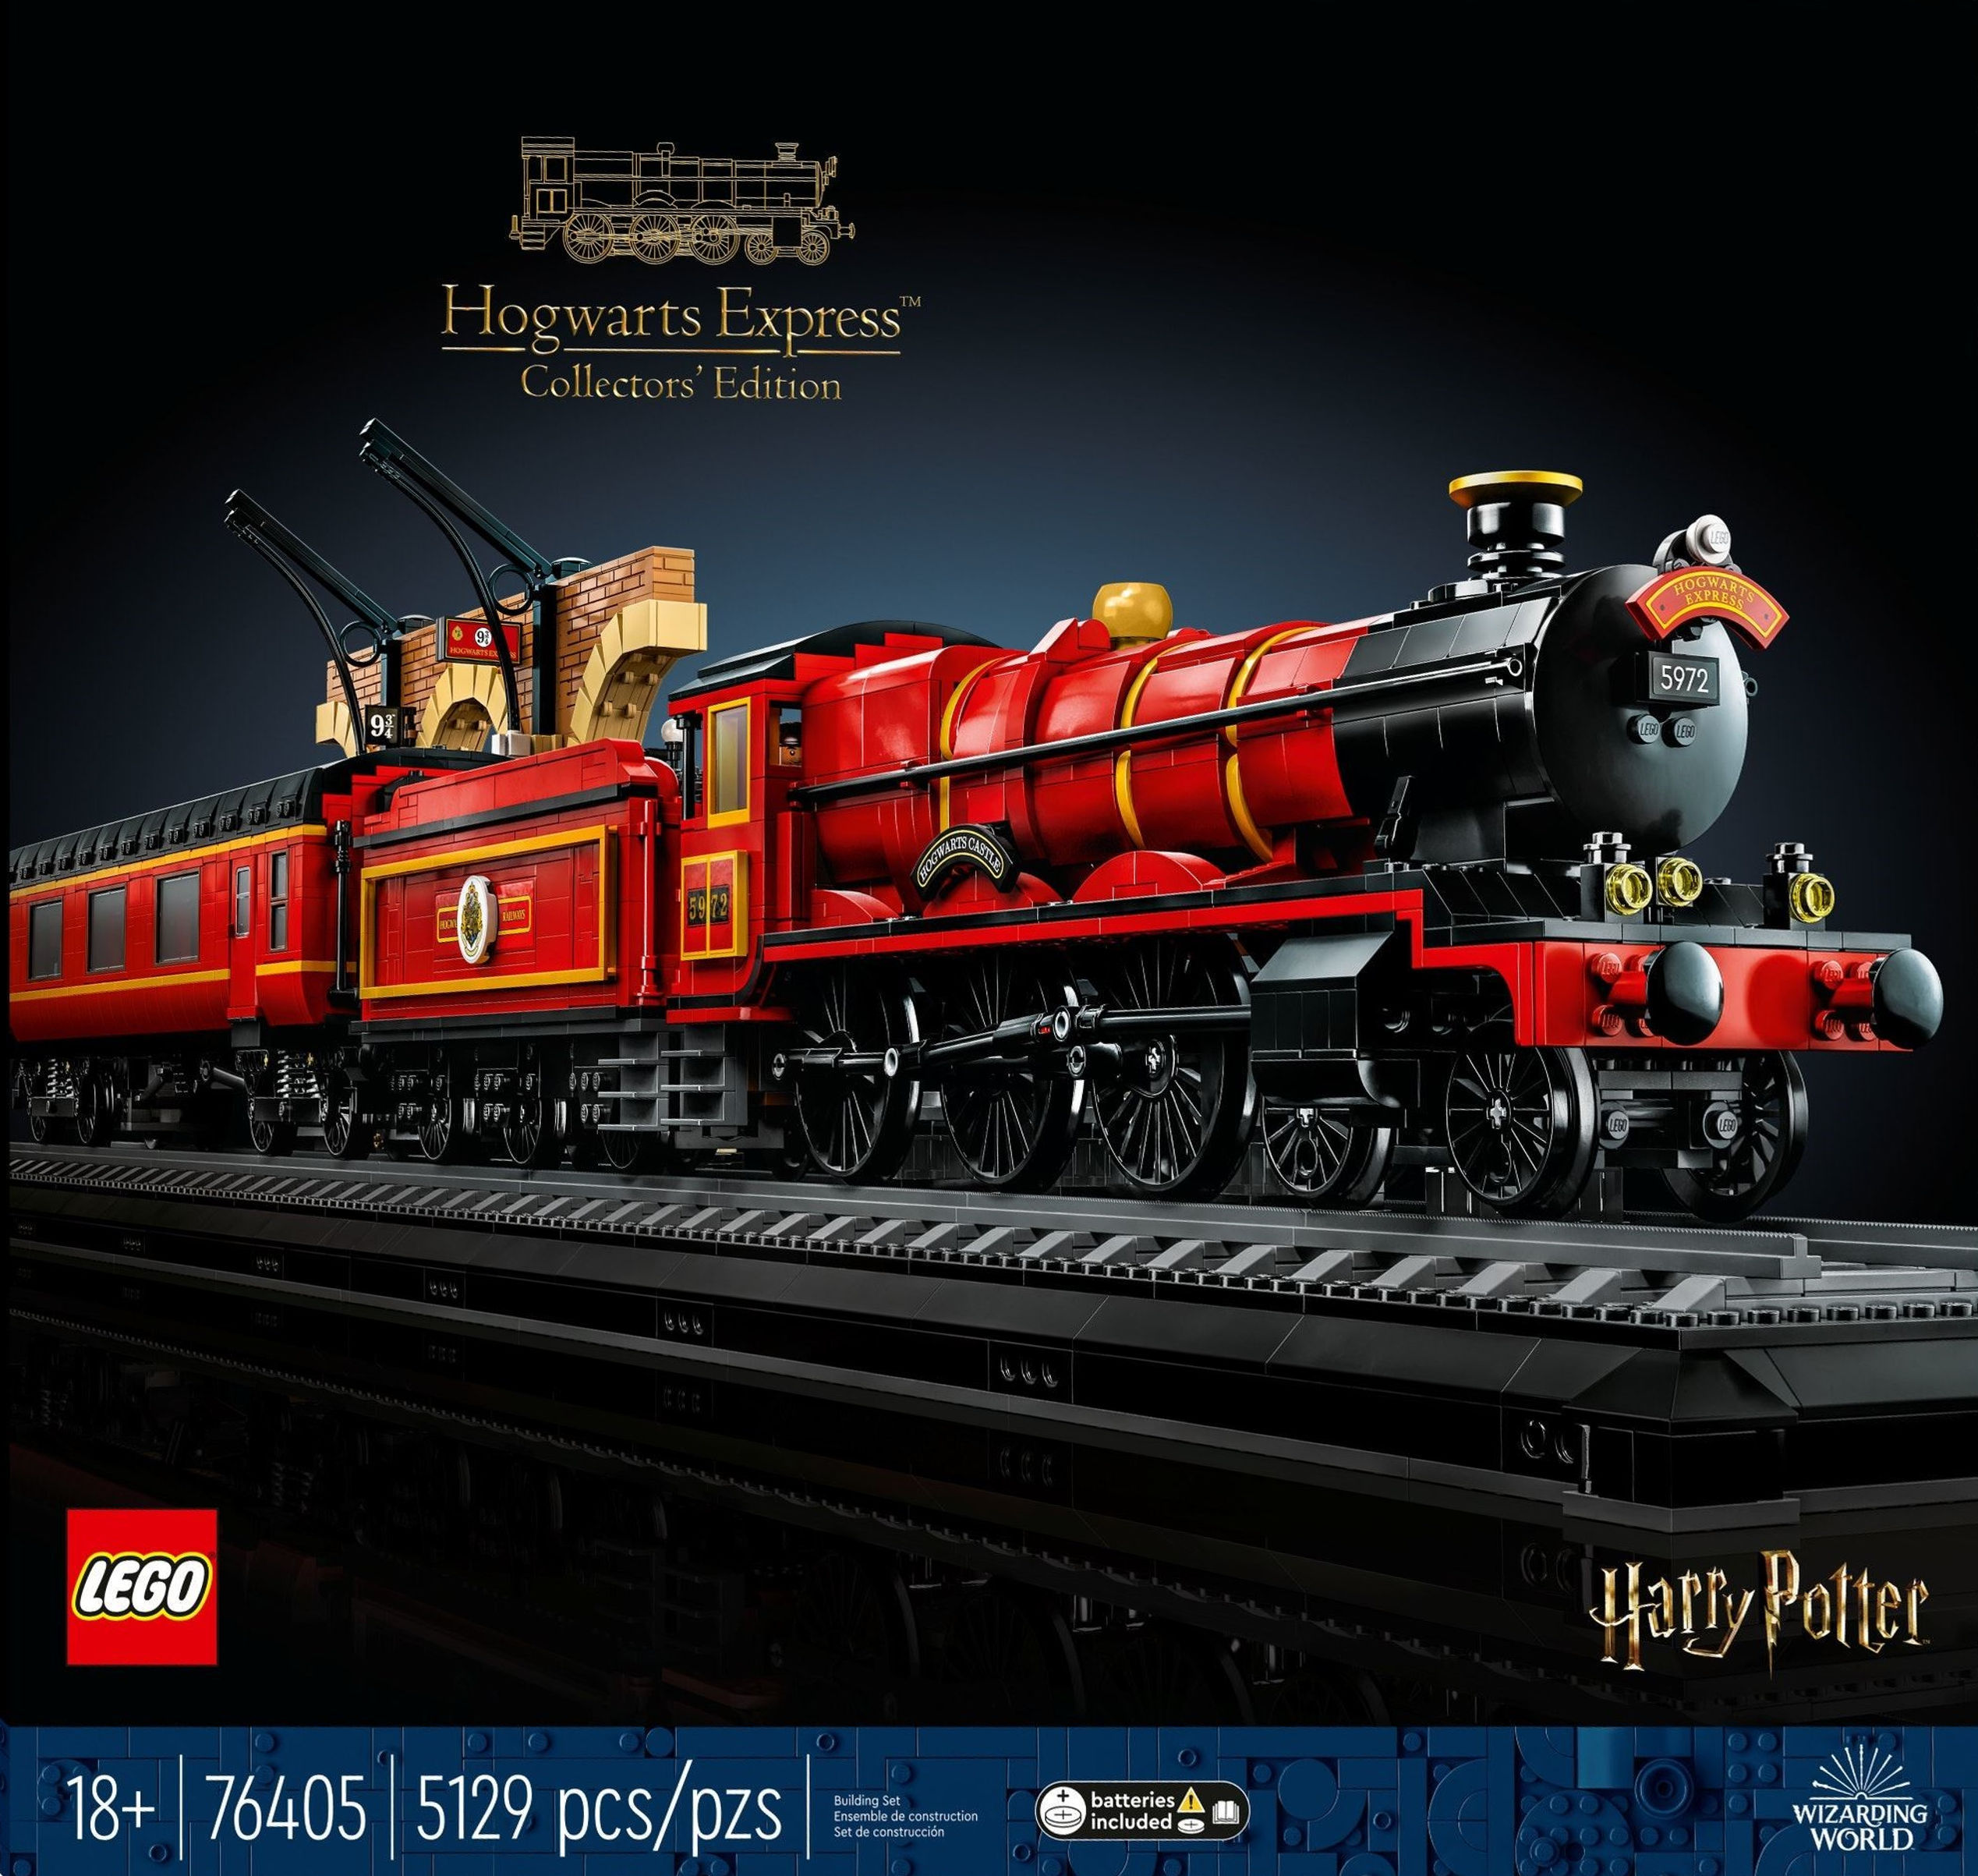 Train Falcon de Luxe Full Steam Ahead Trains Paint By Numbers Kit Painting